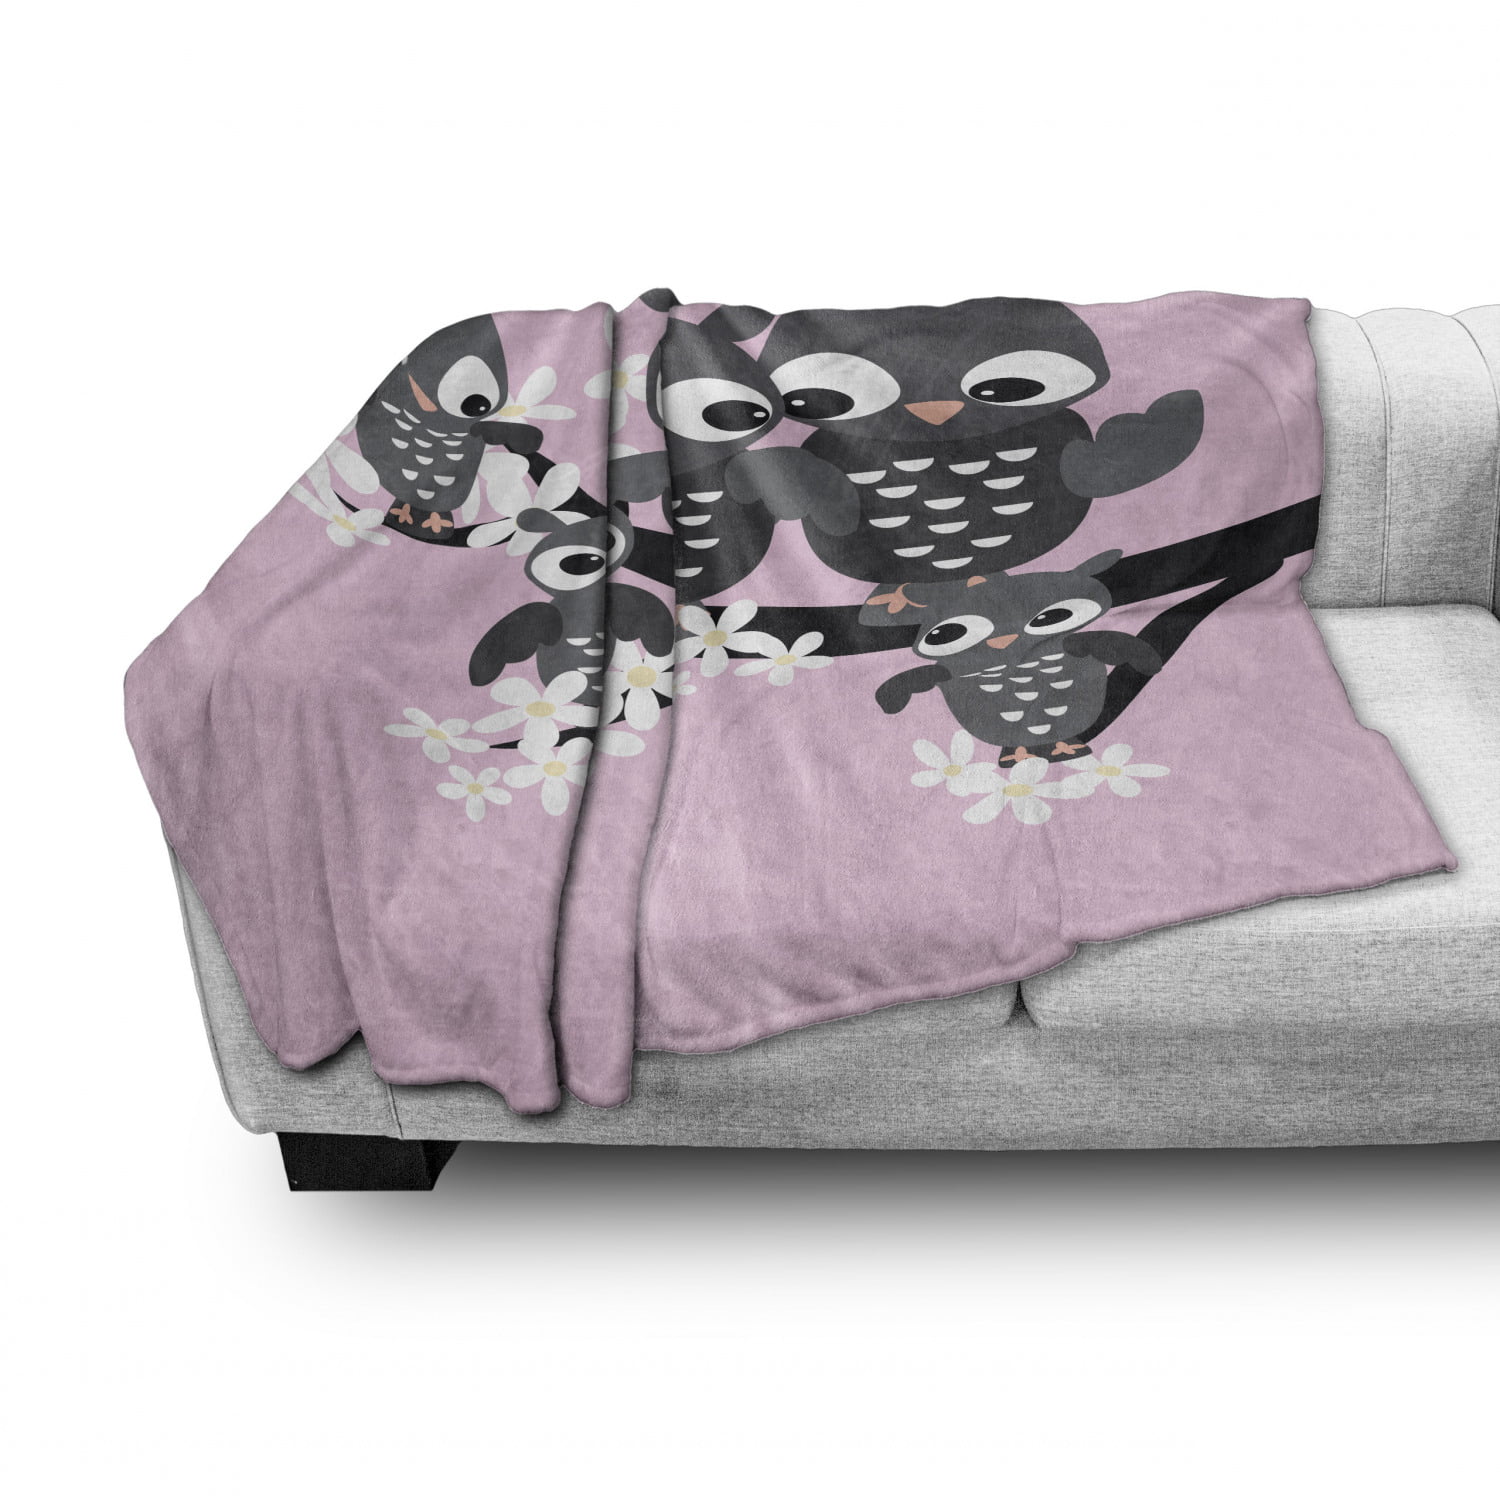 Interpretation of a Family on a Tree Branch Cozy Plush for Indoor and Outdoor Use Baby Pink Dark Grey 50 x 70 Ambesonne Owl Print Soft Flannel Fleece Throw Blanket 